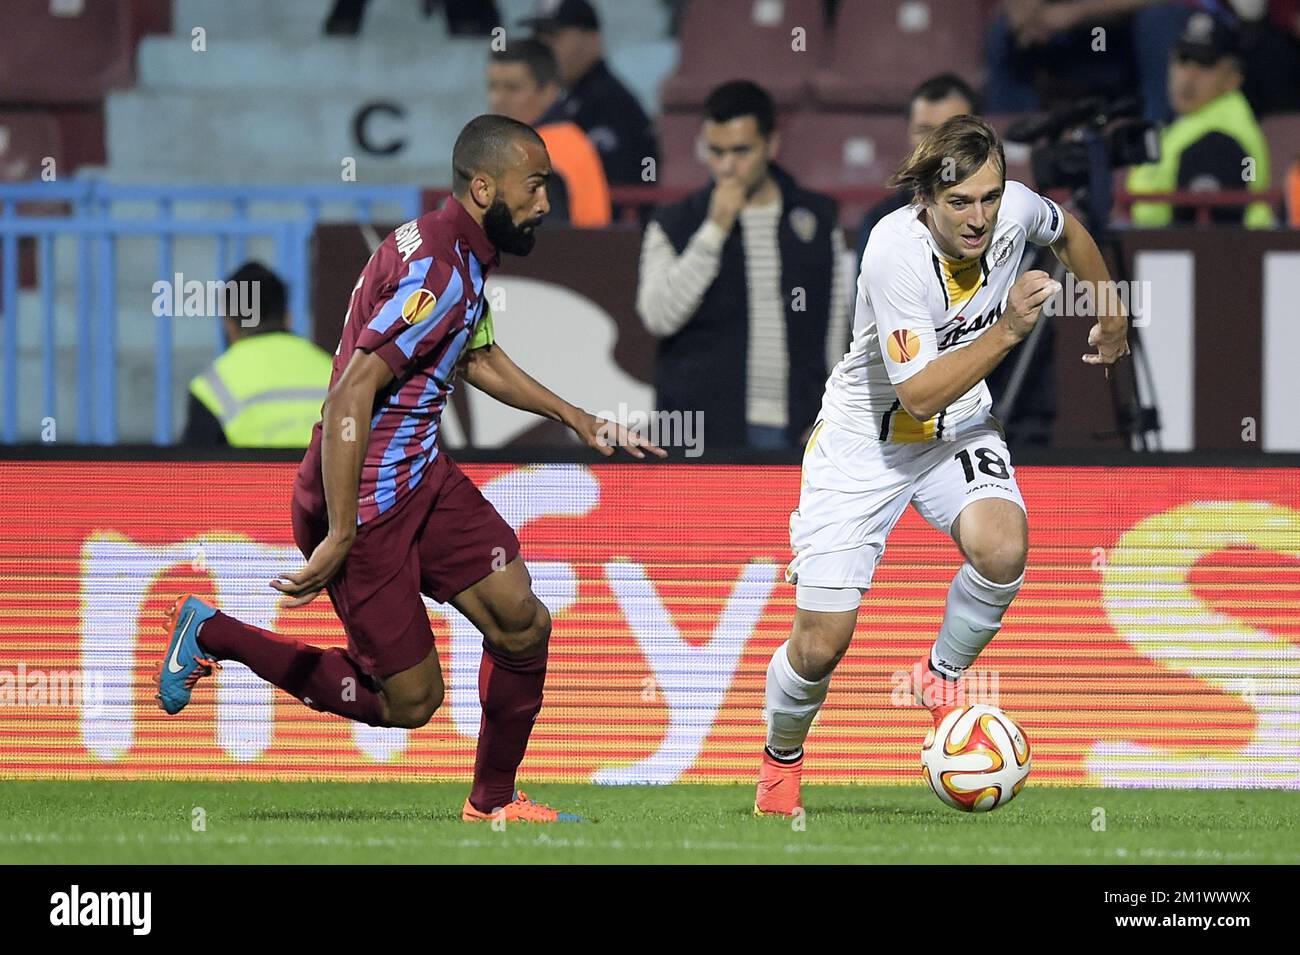 20141023 - TRABZON, TURKEY: Trabzonspor's Jose Bosingwa and Lokeren's Besart Abdurahimi fight for the ball during a game between Turkish club Trabzonspor AS and Belgian soccer team KSC Lokeren OVL in the Huseyin Avni Aker Stadium in Trabzon, Thursday 23 October 2014. It is the third day of the group stage of the UEFA Europa League competition, in group L. BELGA PHOTO YORICK JANSENS Stock Photo